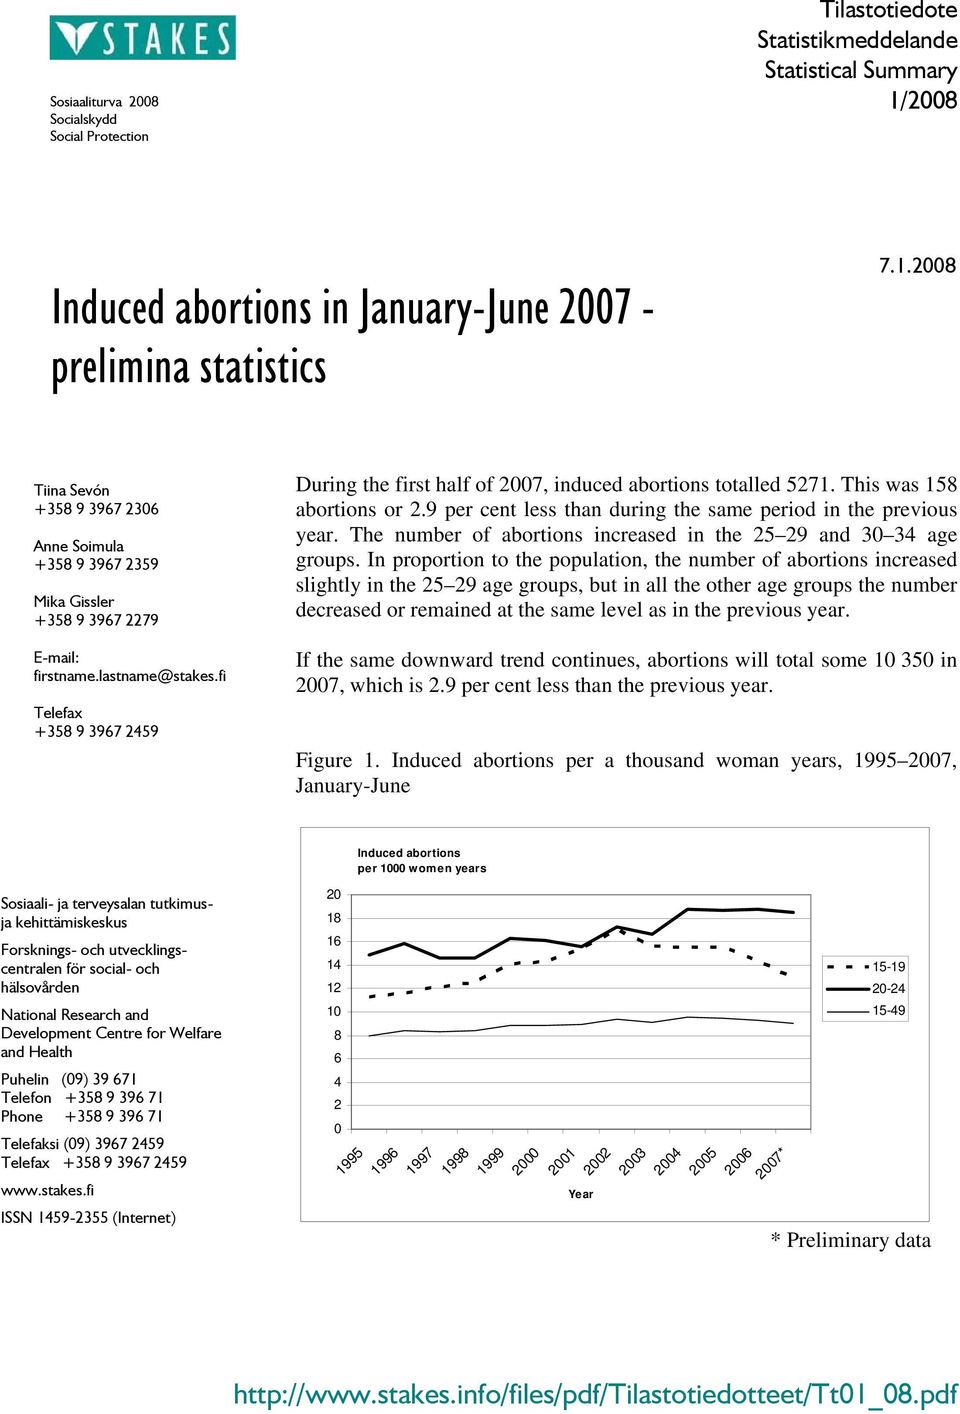 fi Telefax +358 9 3967 2459 During the first half of 2007, induced abortions totalled 5271. This was 158 abortions or 2.9 per cent less than during the same period in the previous year.